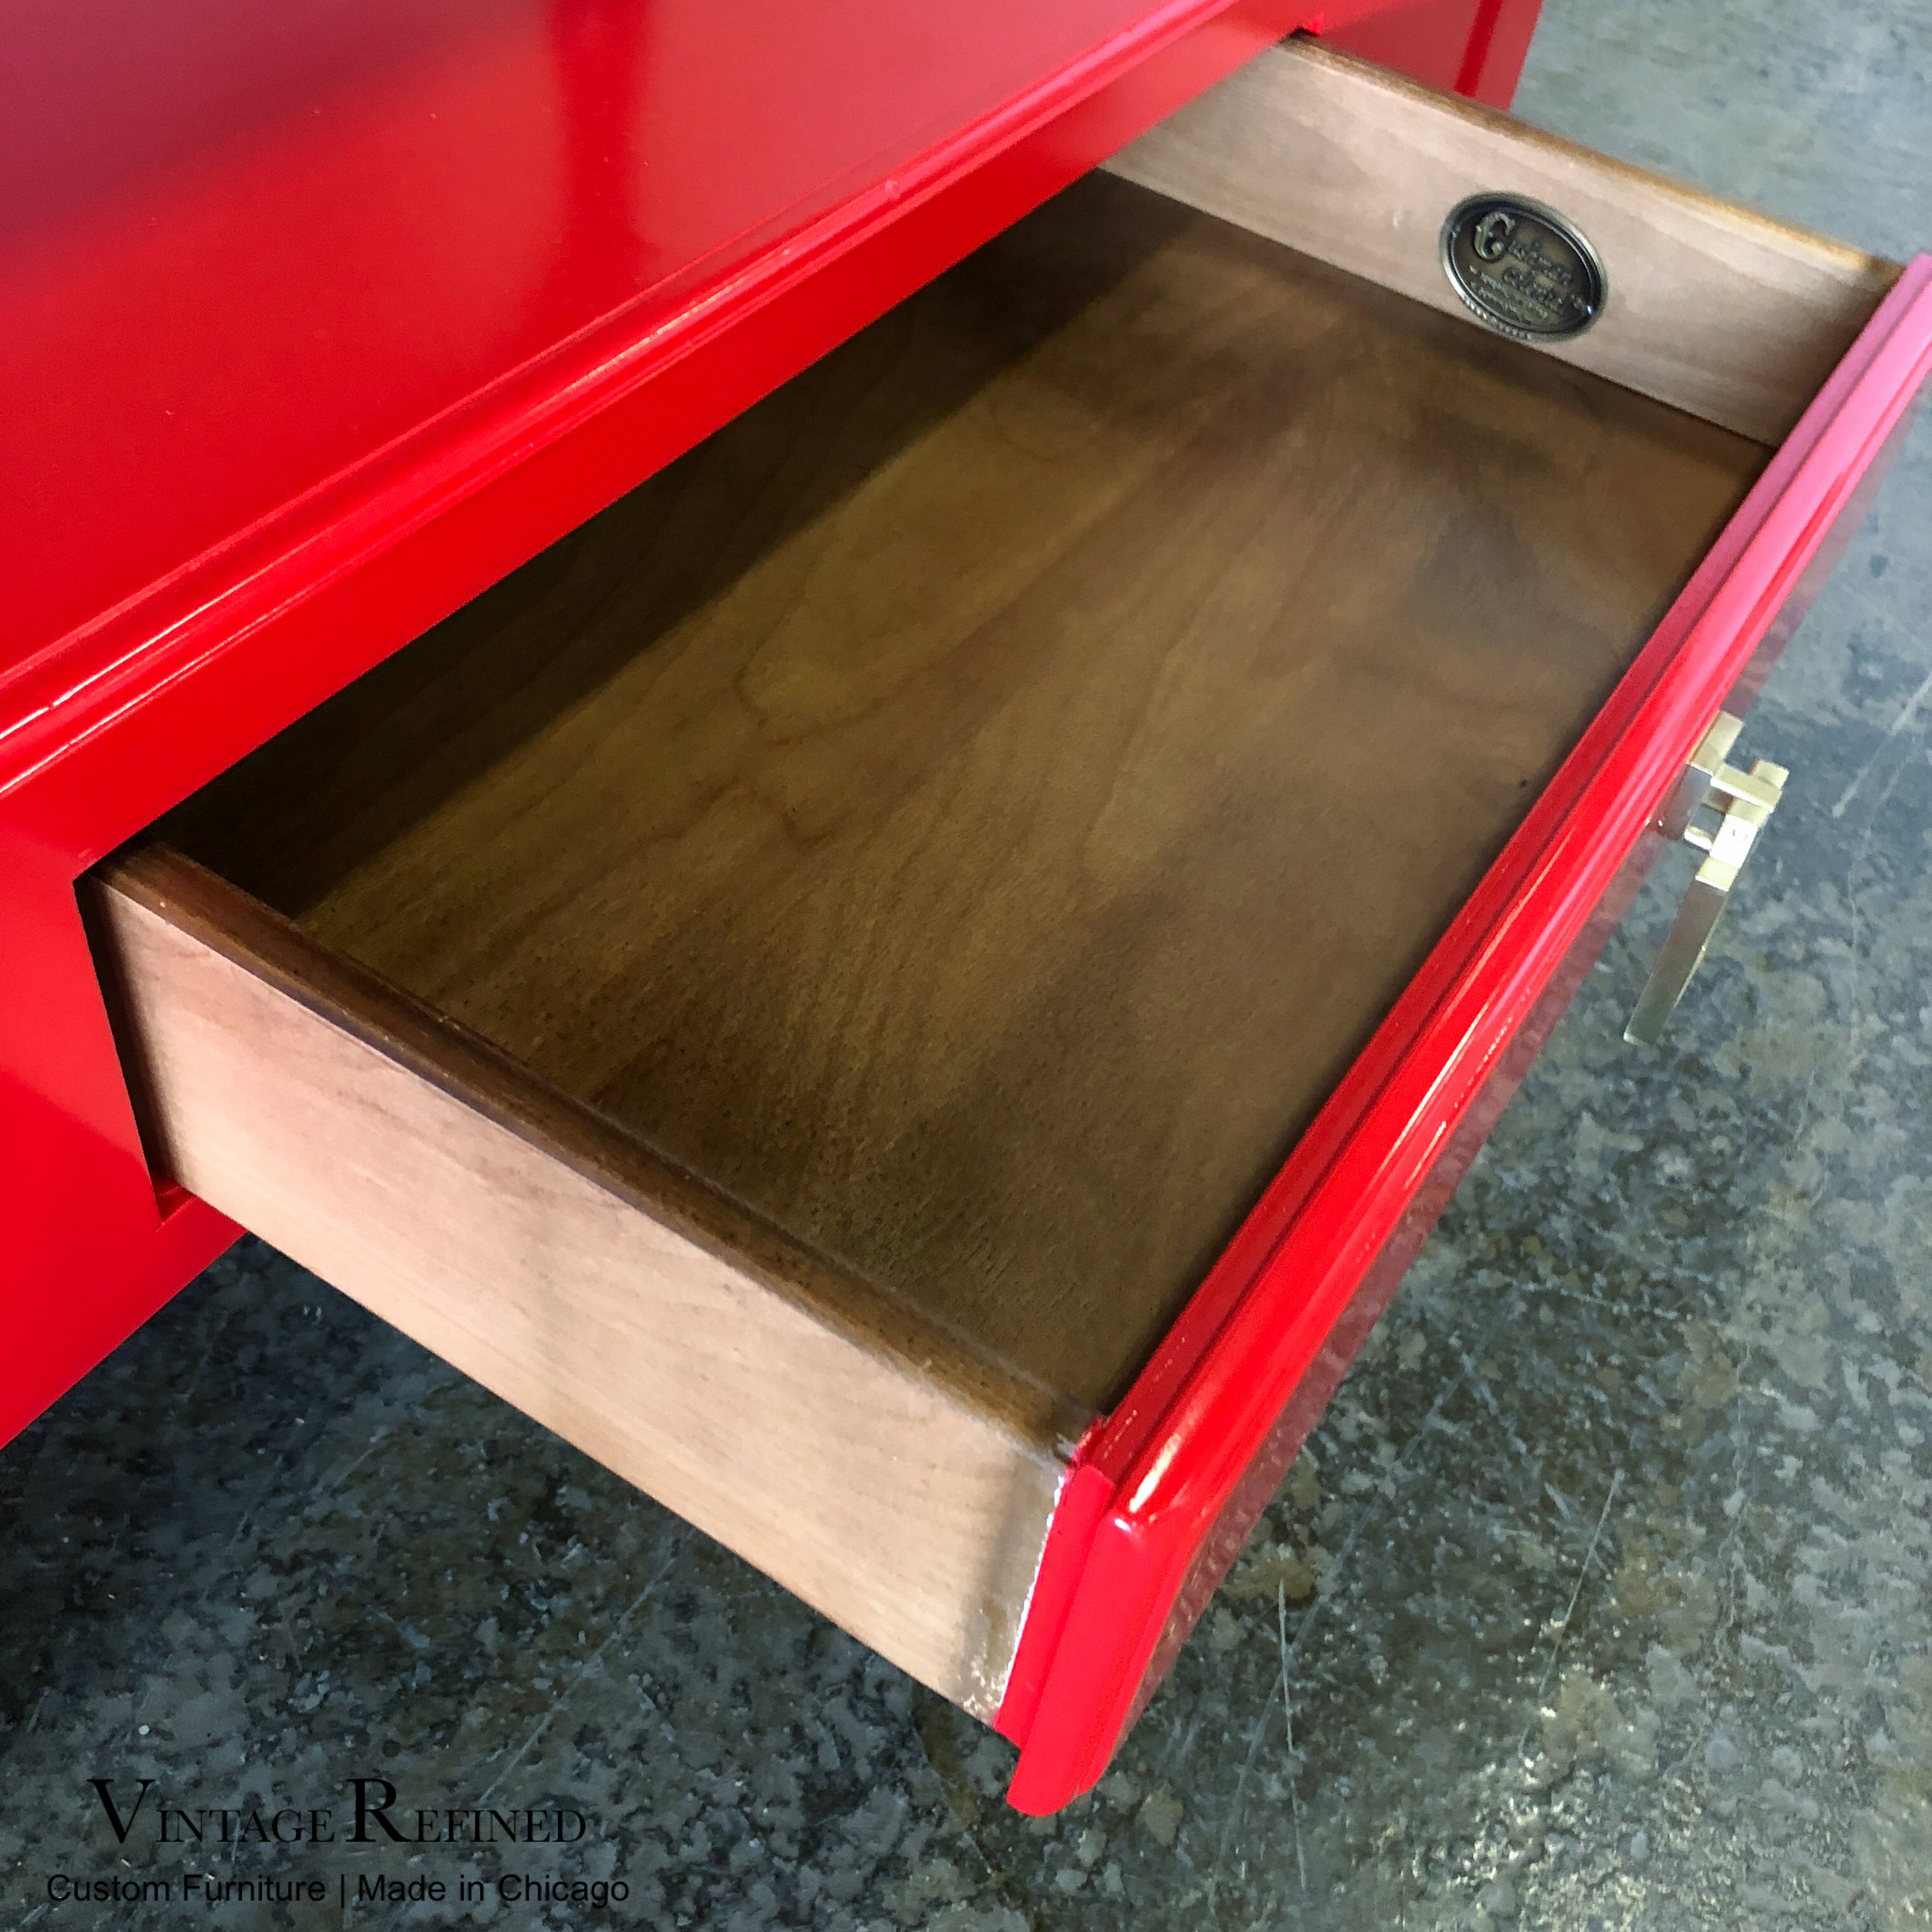 Vintage Refined Available Red Lacquer Bar Cart Accent Table